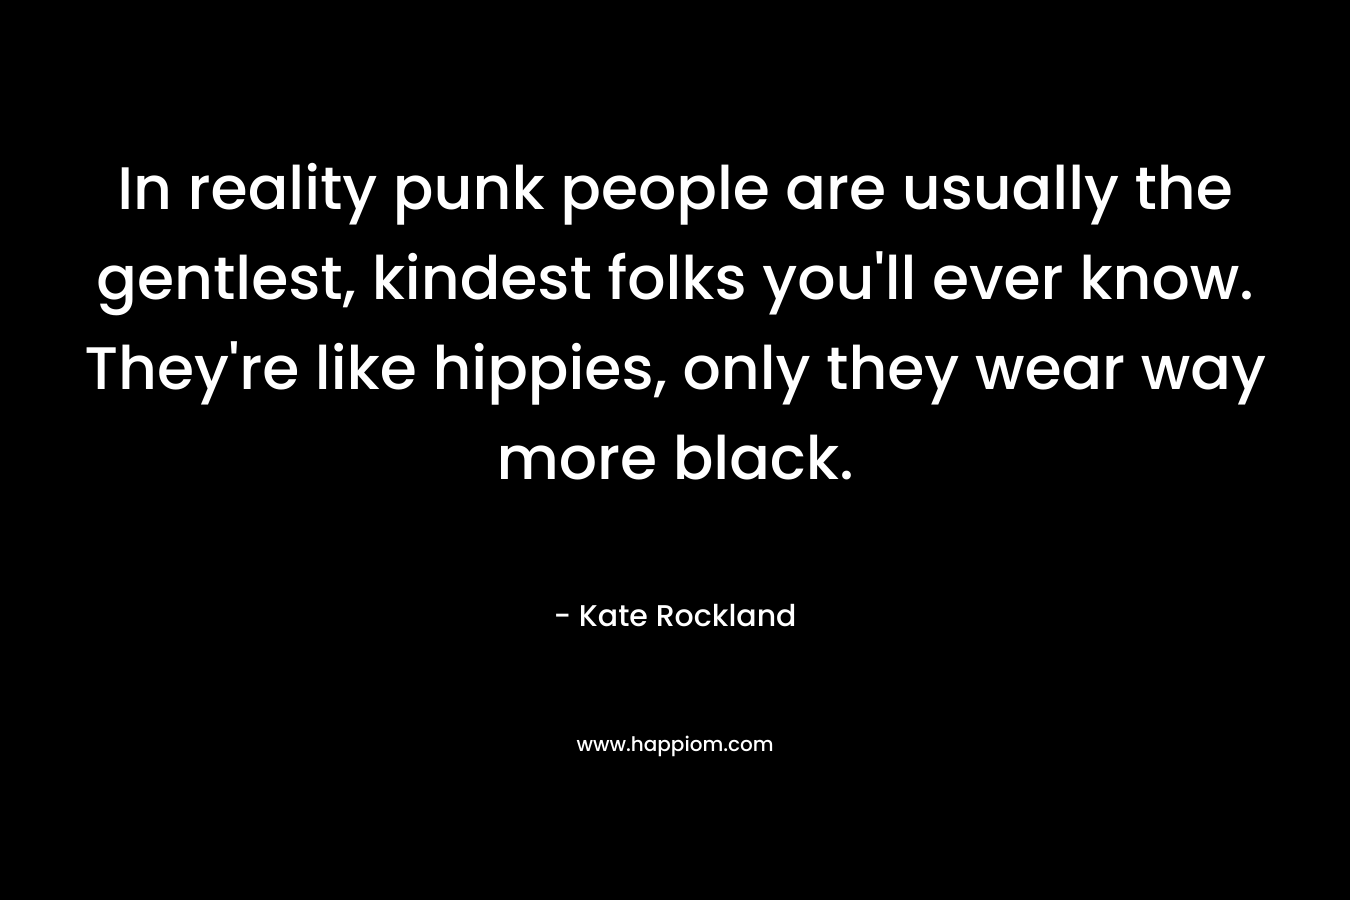 In reality punk people are usually the gentlest, kindest folks you’ll ever know. They’re like hippies, only they wear way more black. – Kate Rockland